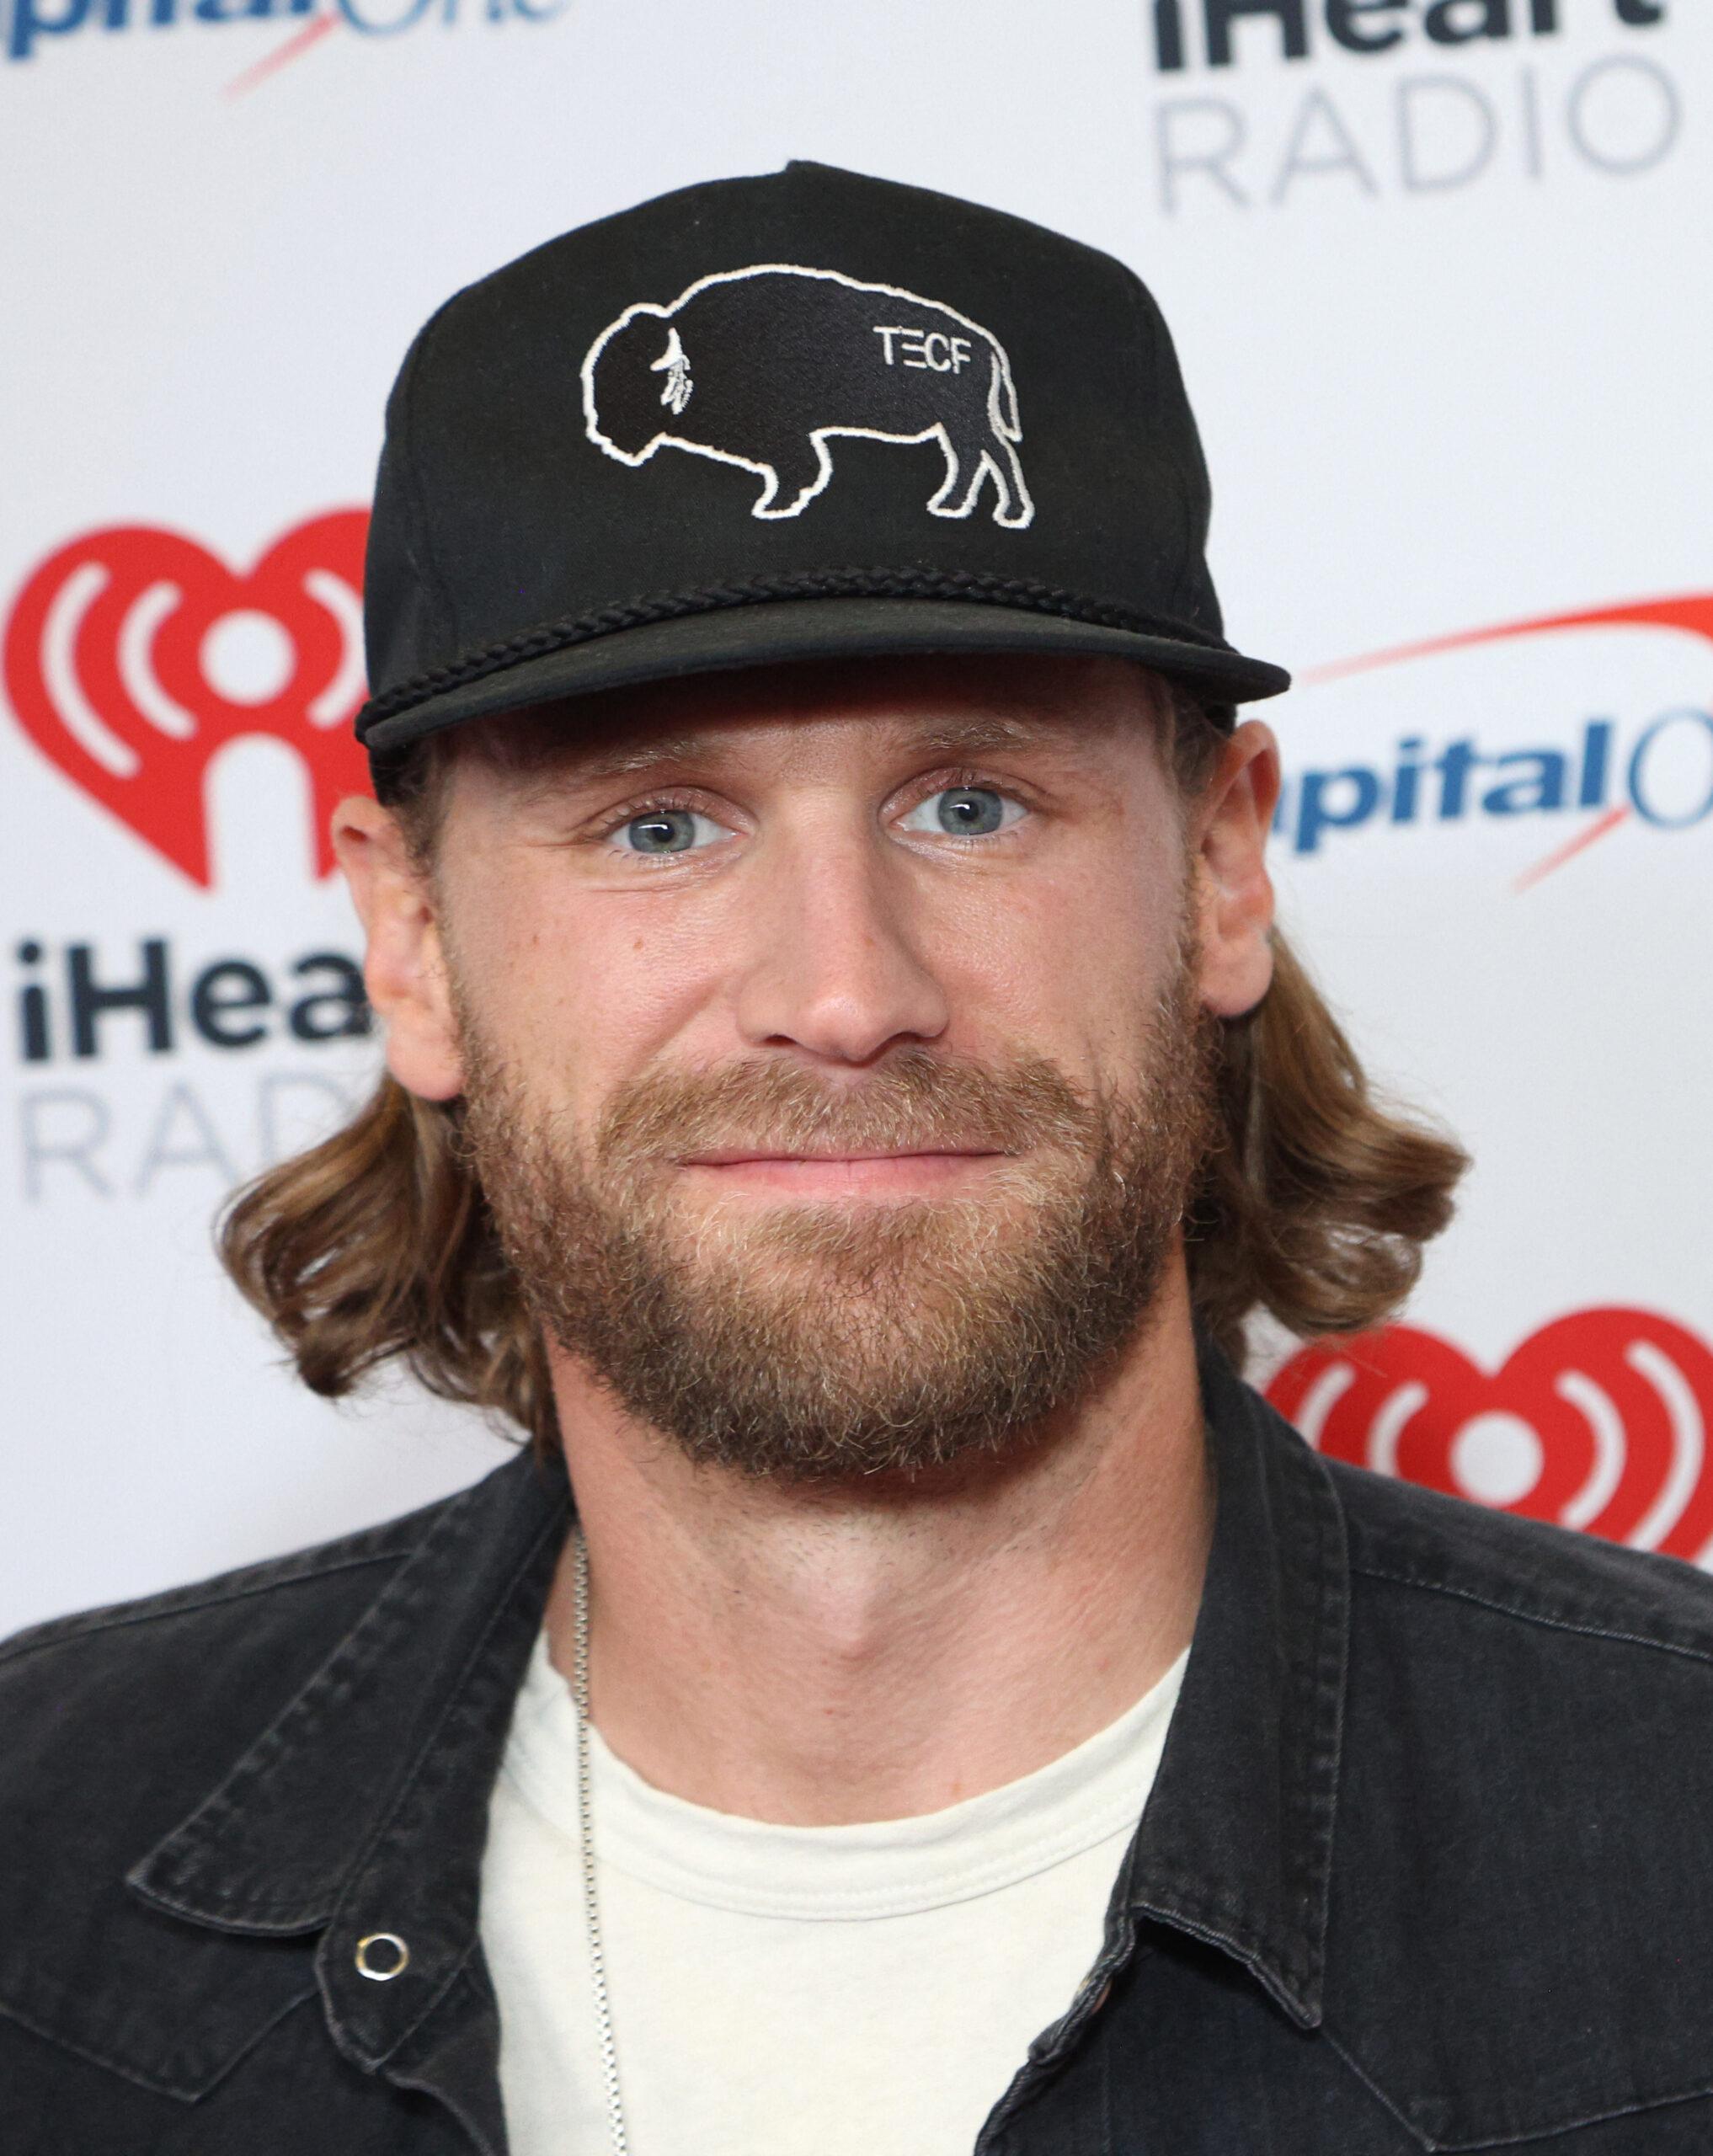 Chase Rice at 2022 iHeartRadio Music Festival - Press Room - Day 2